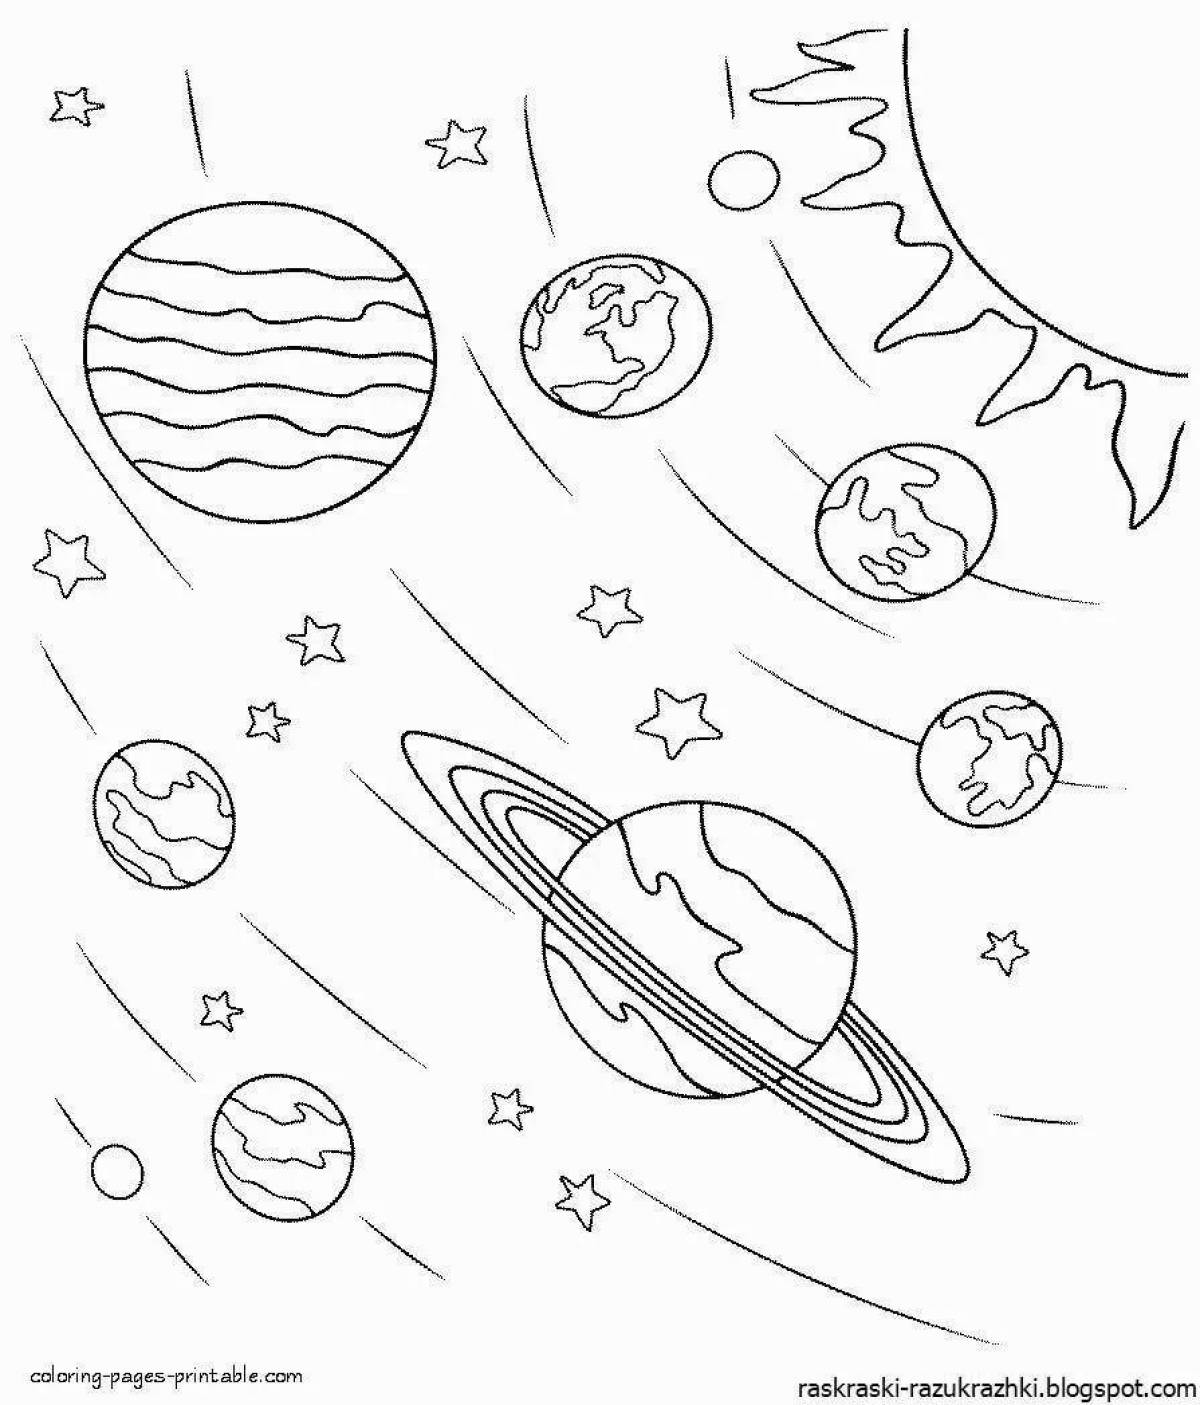 Fancy space coloring book for 4-5 year olds